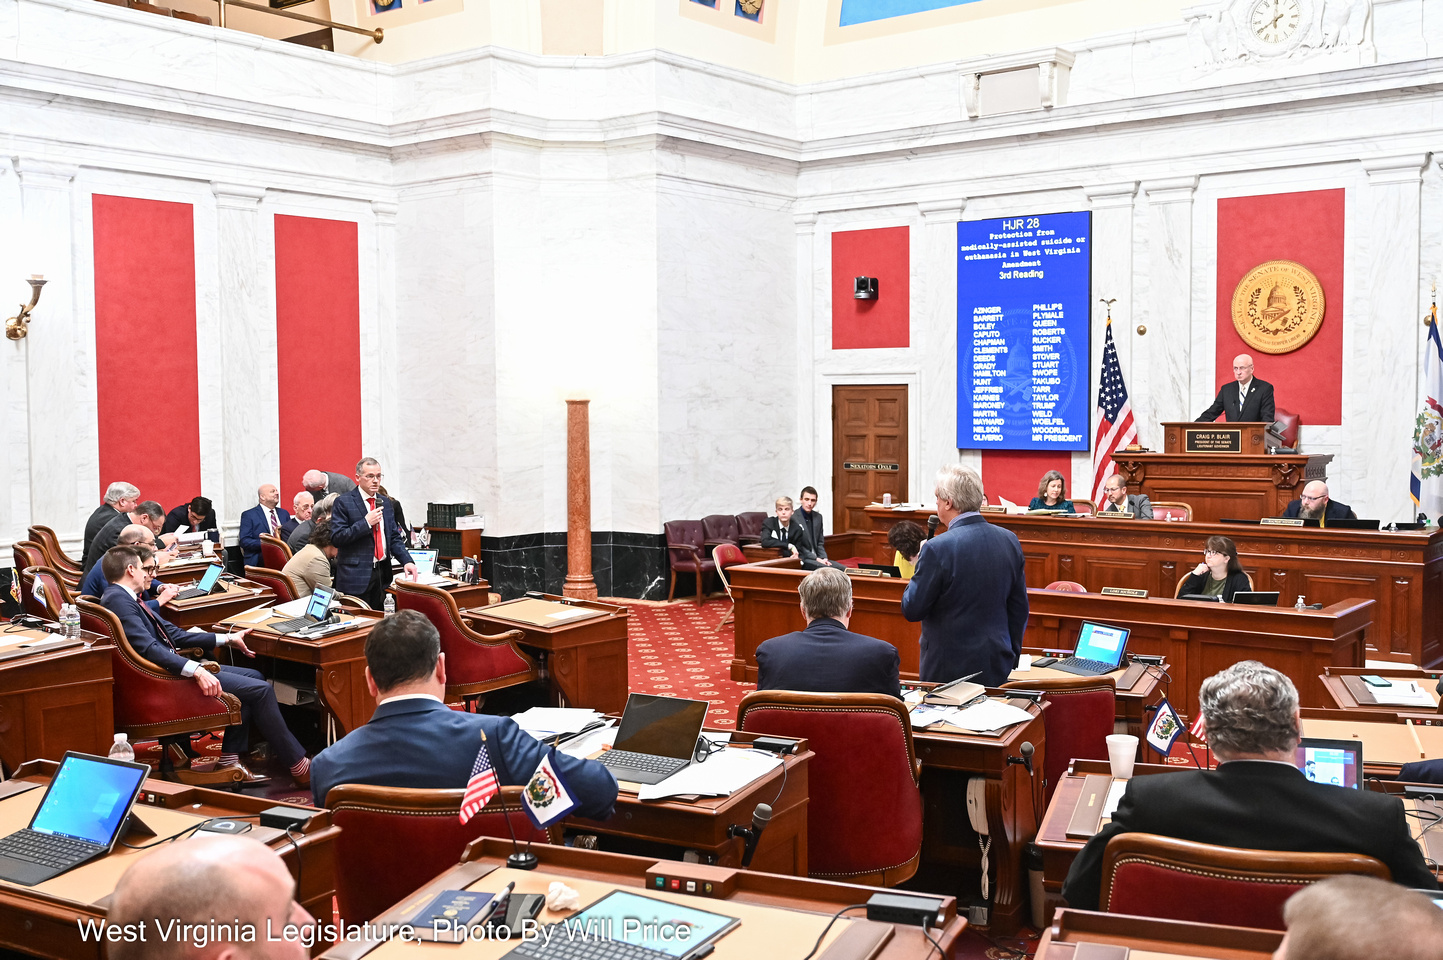 West Virginia Legislature Ends Session With Pay Raises, Tax Cut And Failure Of Social Issue Bills